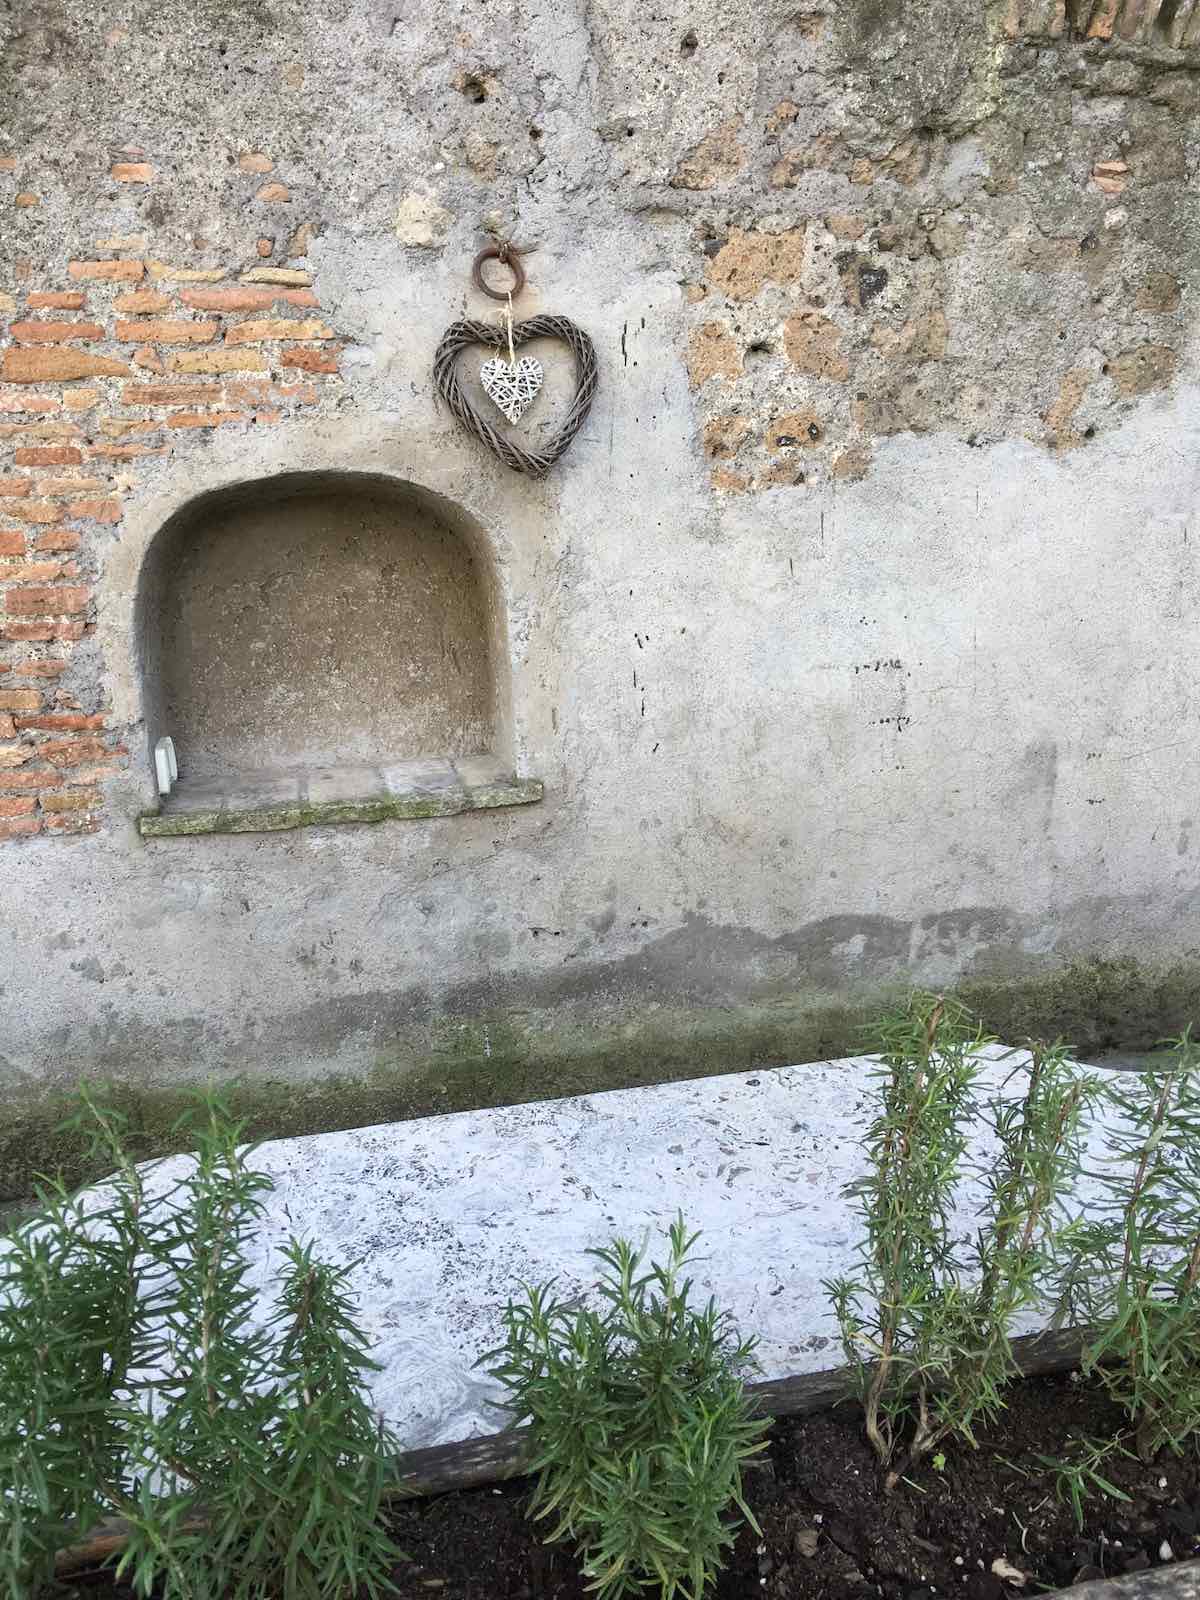 Heart decorations on an old Italian building.